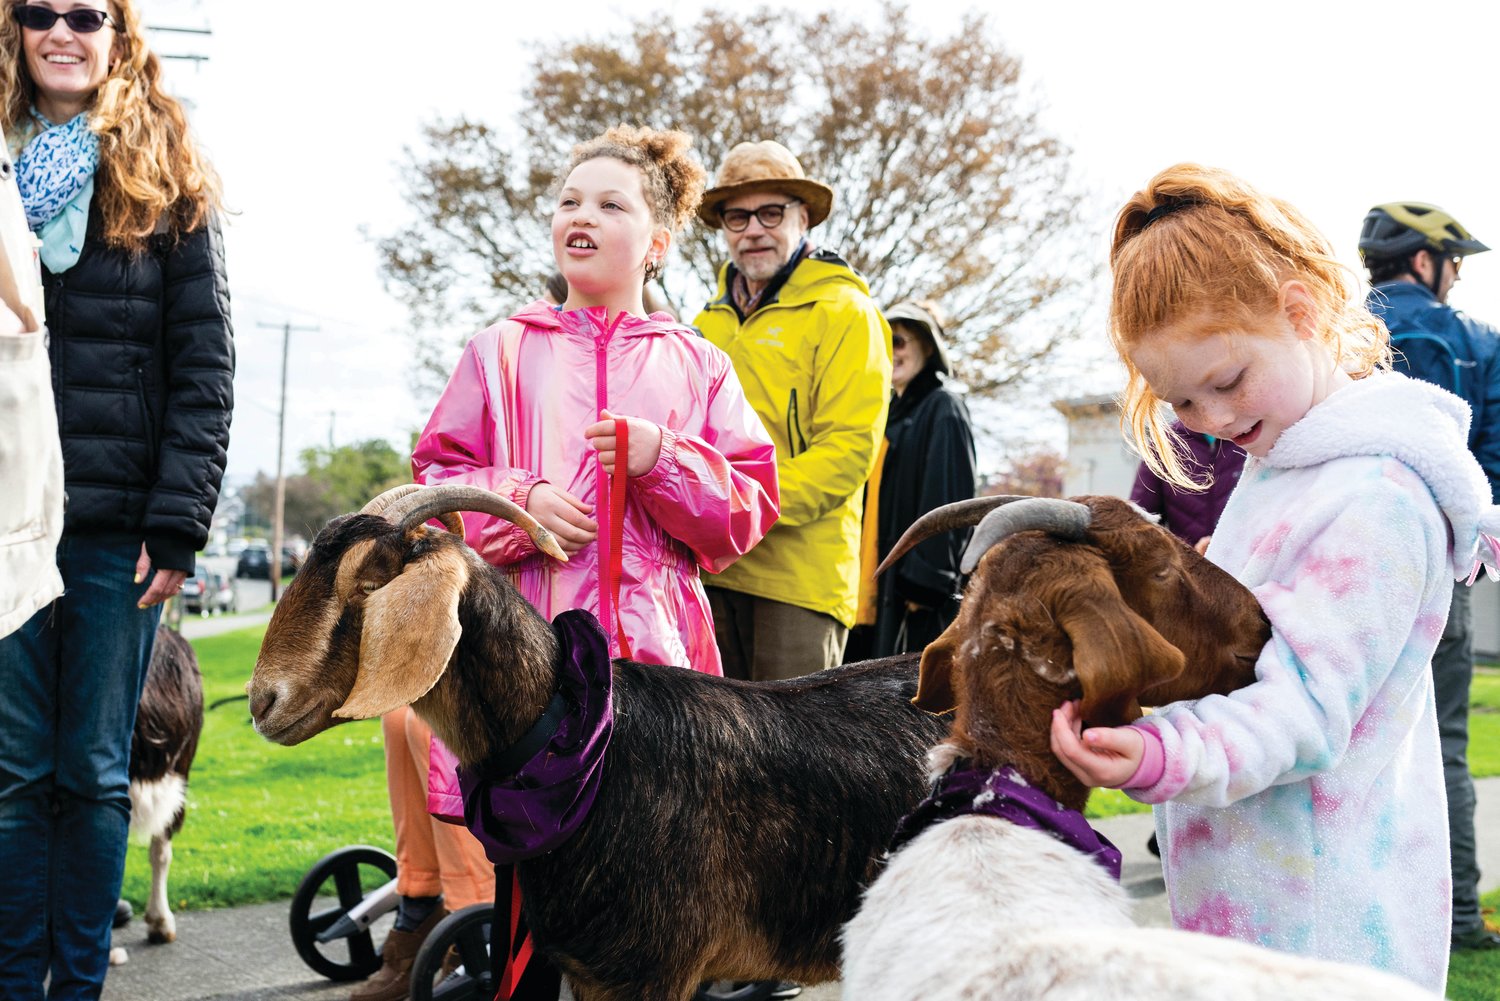 Part of the Port Townsend Farmers Market’s opening day festivities include a goat parade, with grazing critters provided by Ground Control Goats in Port Townsend.